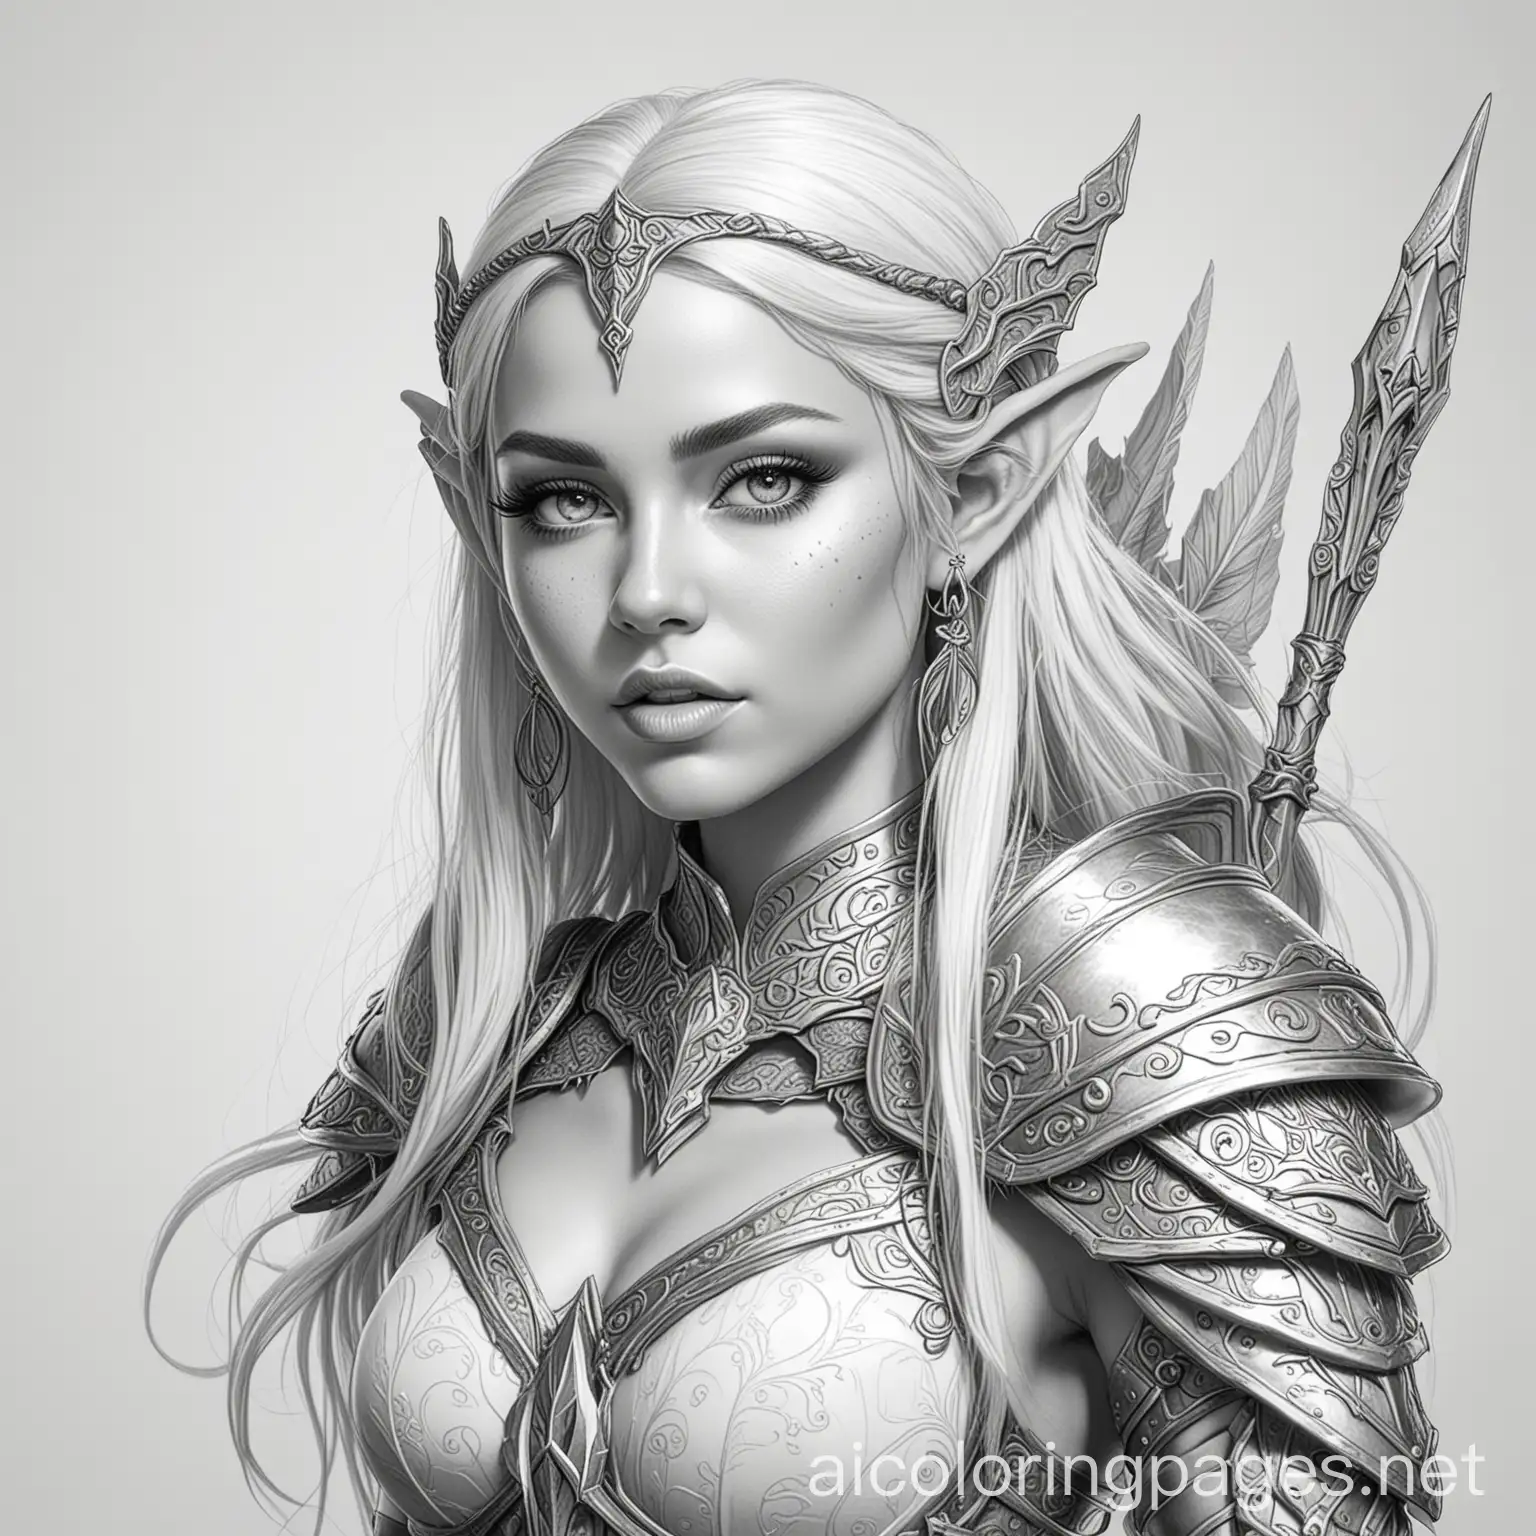 Elf warrior queen, Coloring Page, black and white, line art, white background, Simplicity, Ample White Space. The background of the coloring page is plain white to make it easy for young children to color within the lines. The outlines of all the subjects are easy to distinguish, making it simple for kids to color without too much difficulty